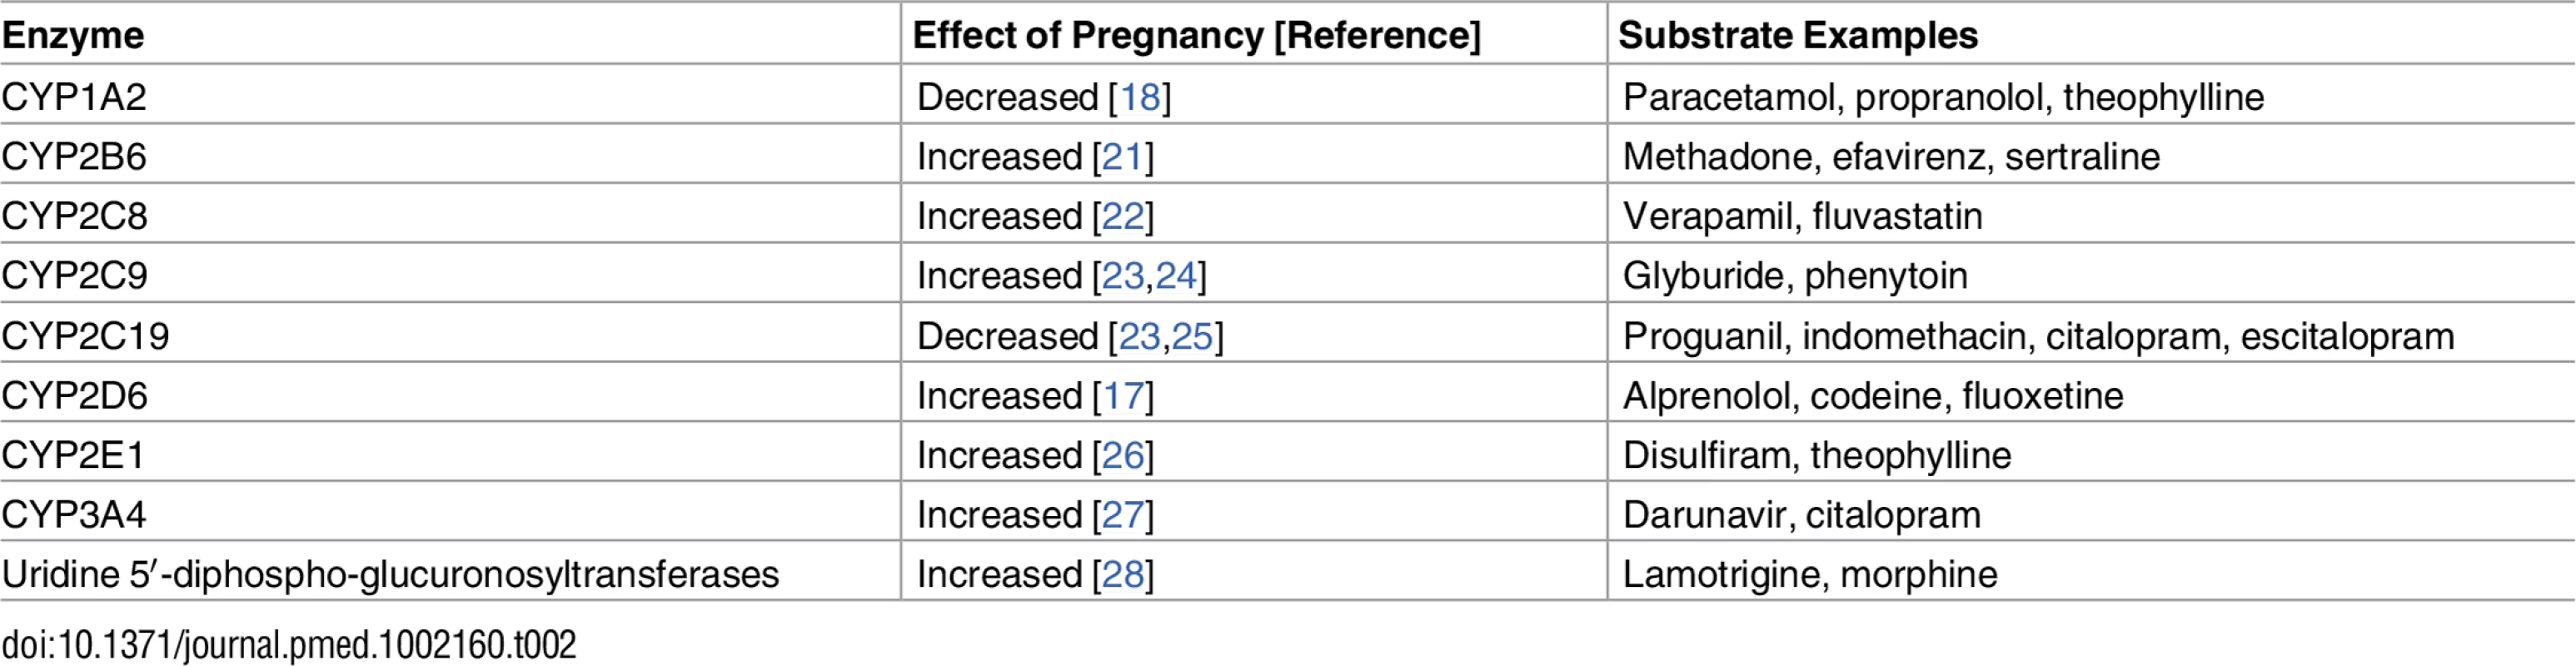 Reported effects of pregnancy on hepatic enzyme activity.